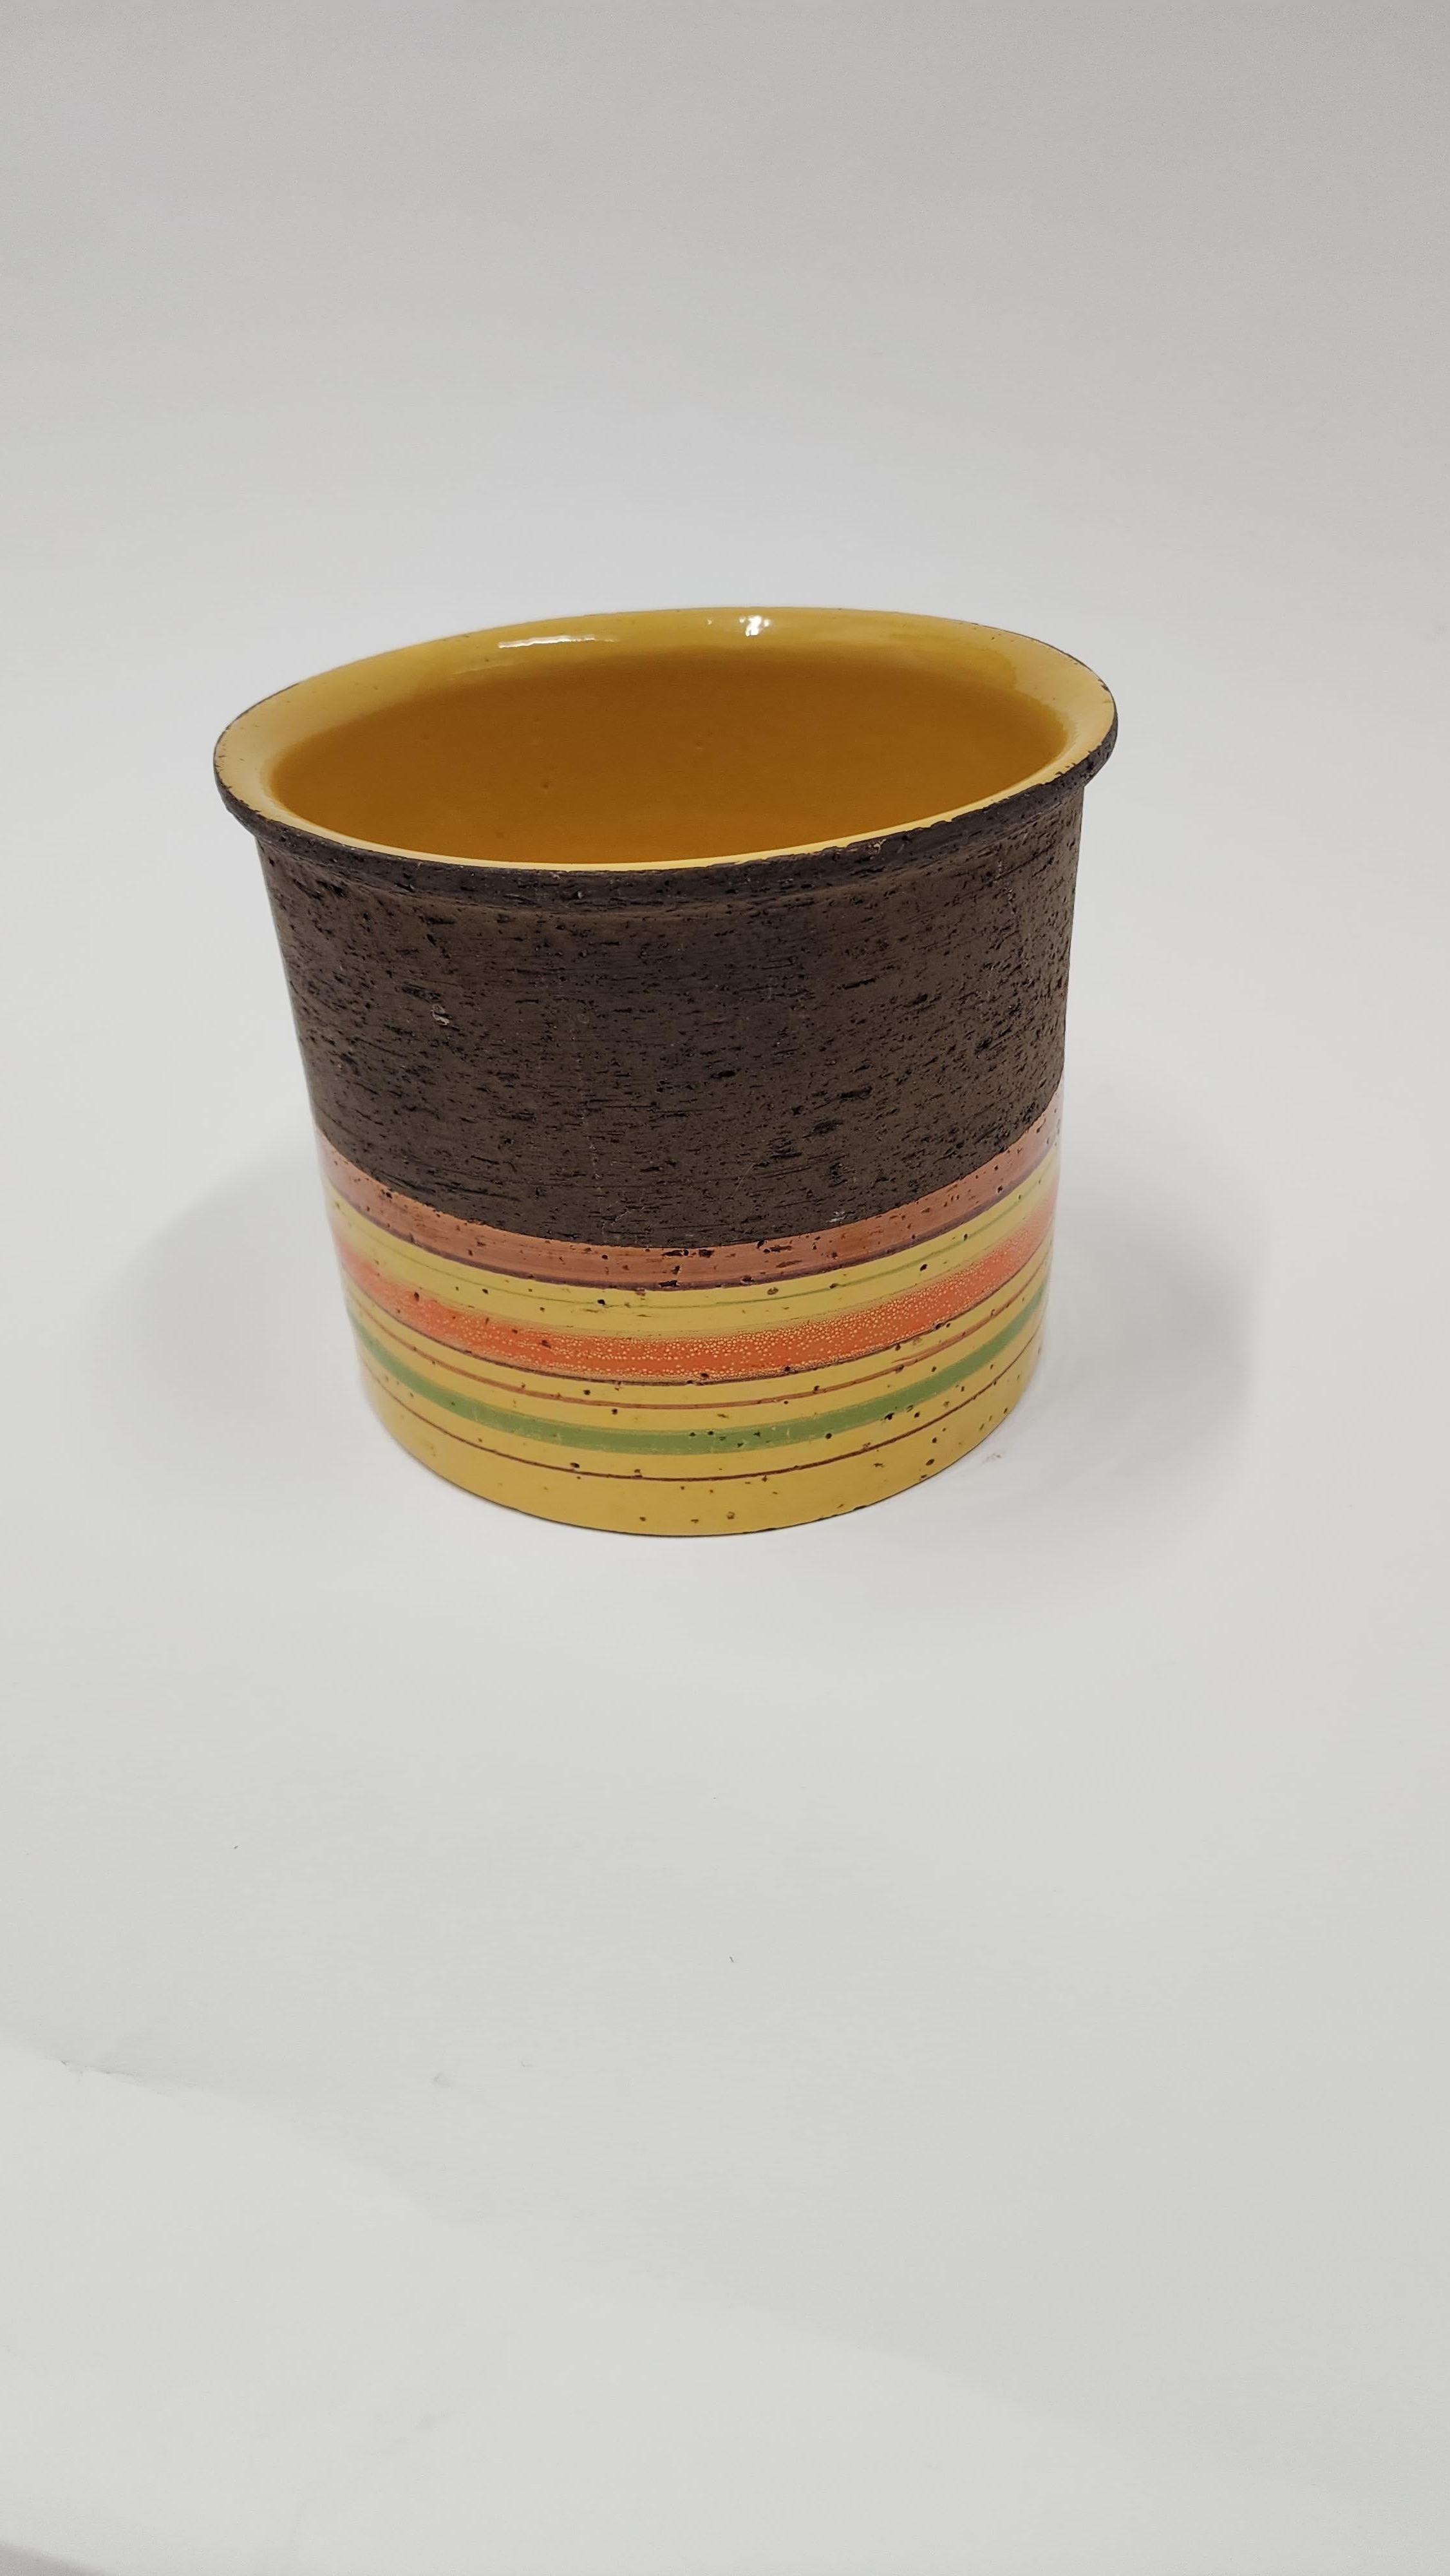 Beautiful brown, yellow, orange and green striped planter.  Designed by Aldo Londi for Rosenthal Netter, made in Itally.  large version available in separate listing.